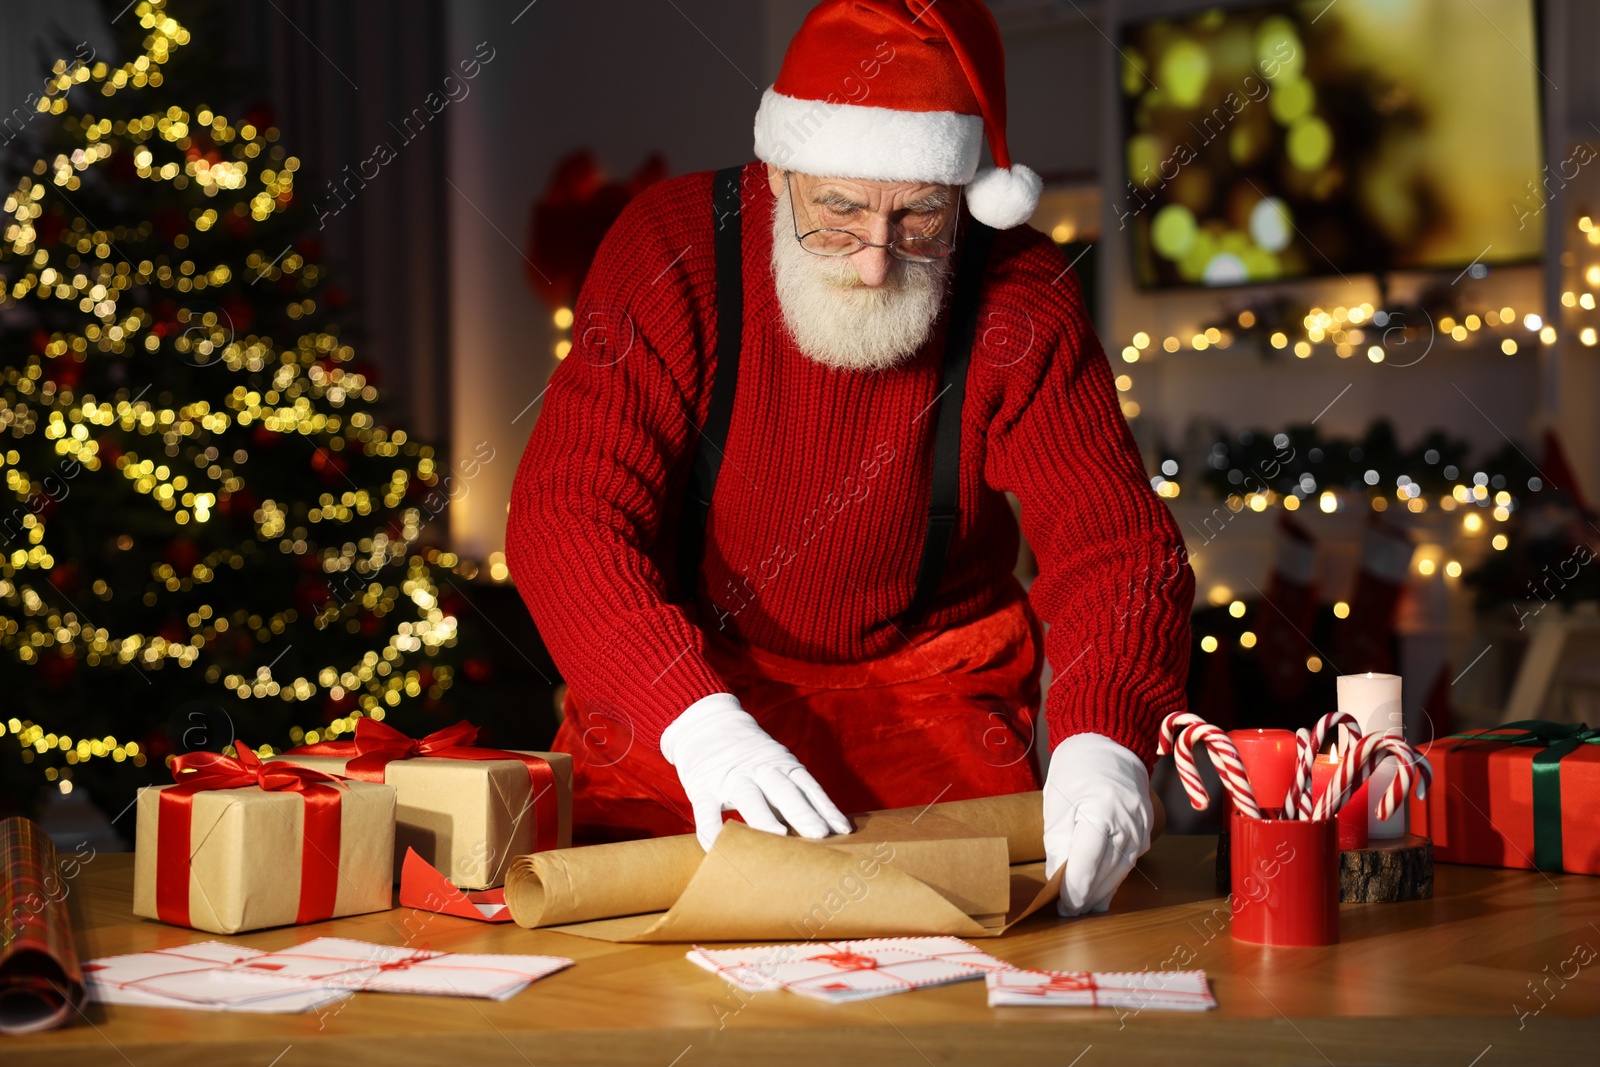 Photo of Santa Claus wrapping gift at his workplace in room decorated for Christmas